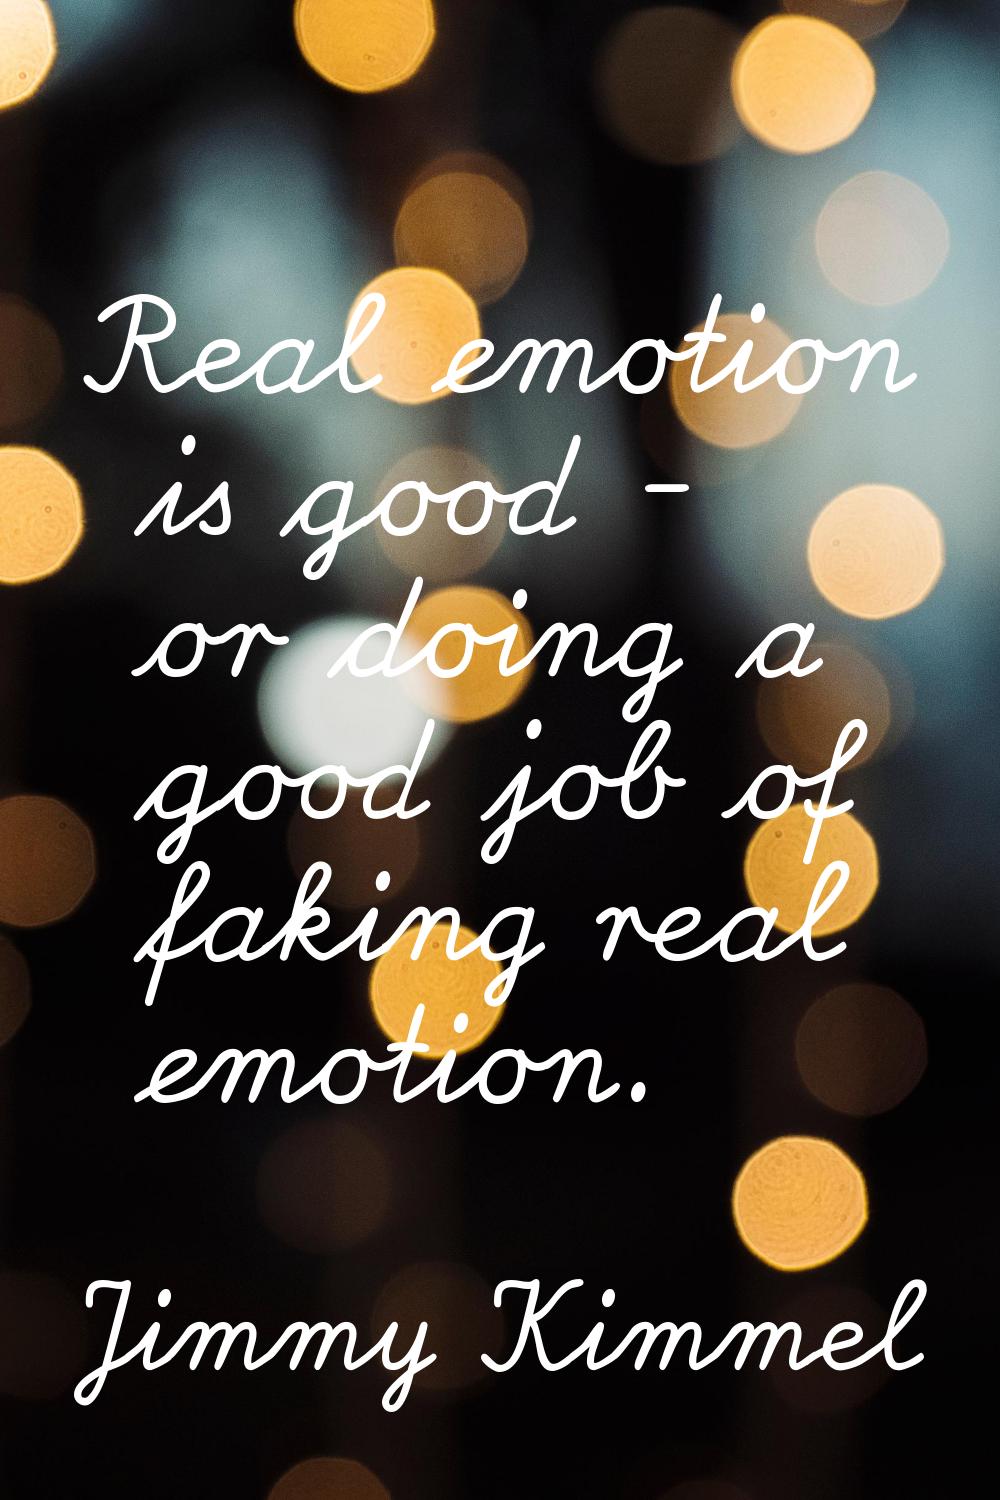 Real emotion is good - or doing a good job of faking real emotion.